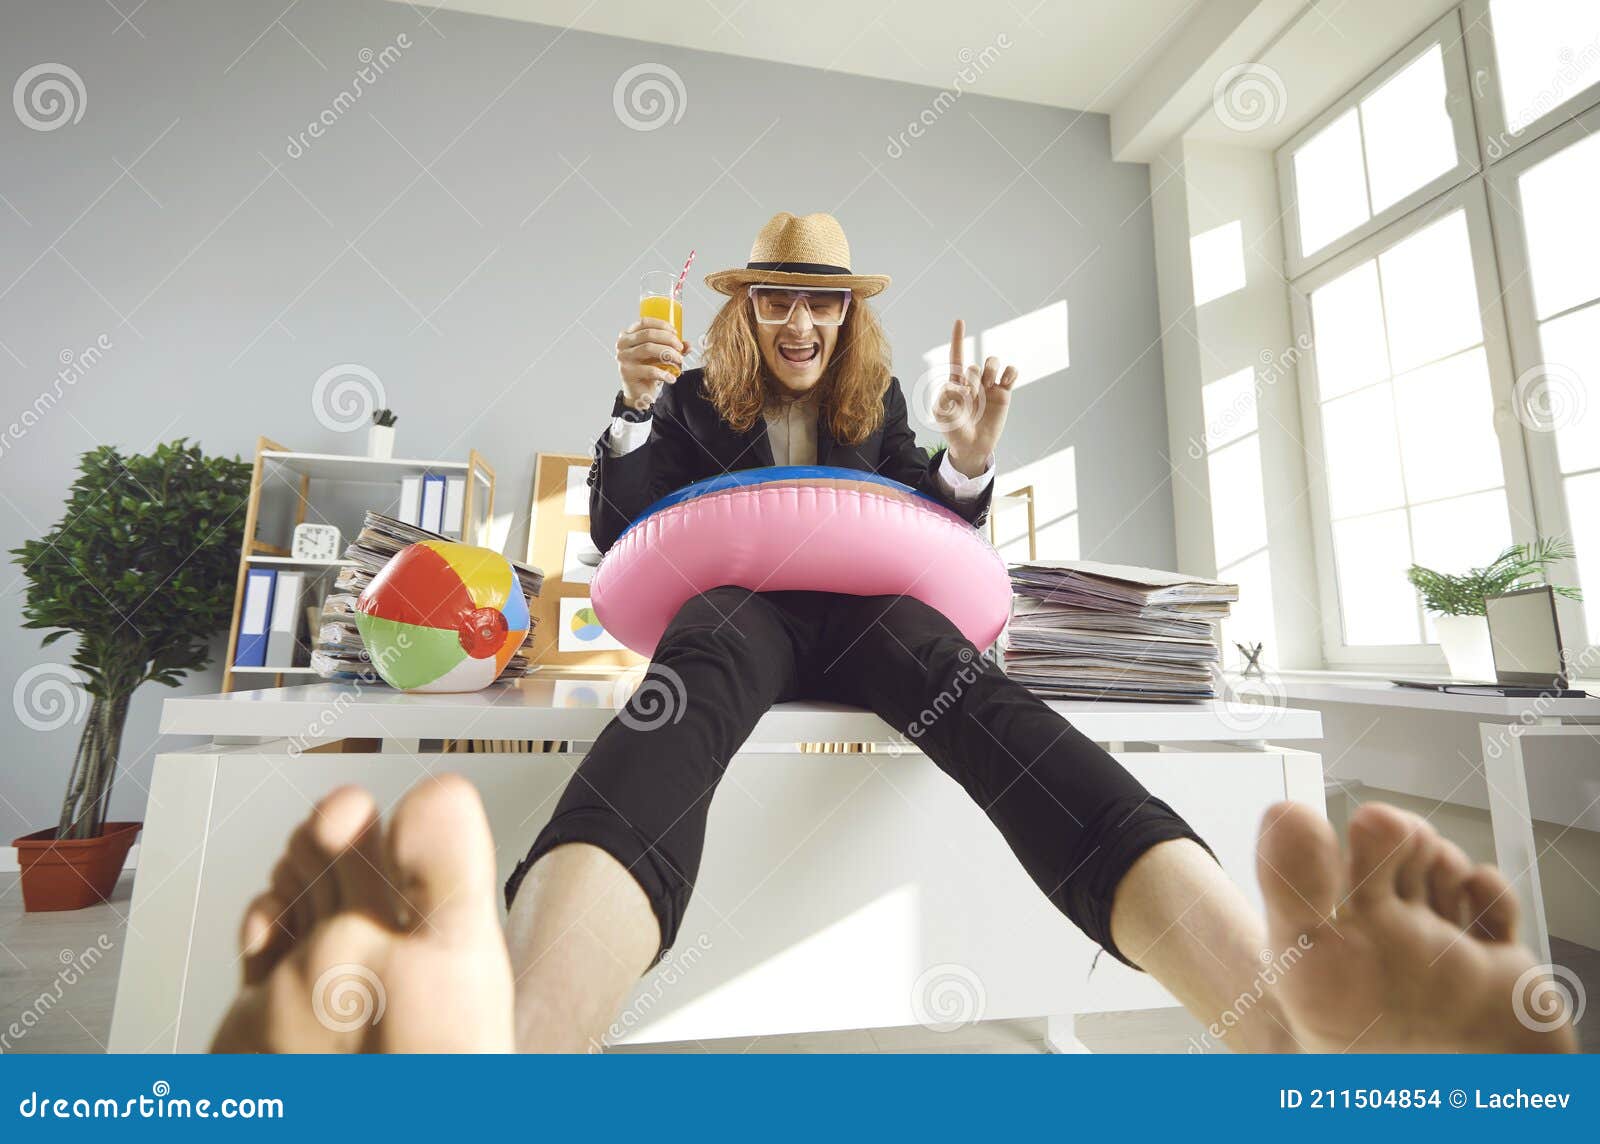 Funny Barefoot Office Worker Sitting on Desk, Drinking Juice and Waiting  for Holidays Stock Photo - Image of cocktail, desk: 211504854